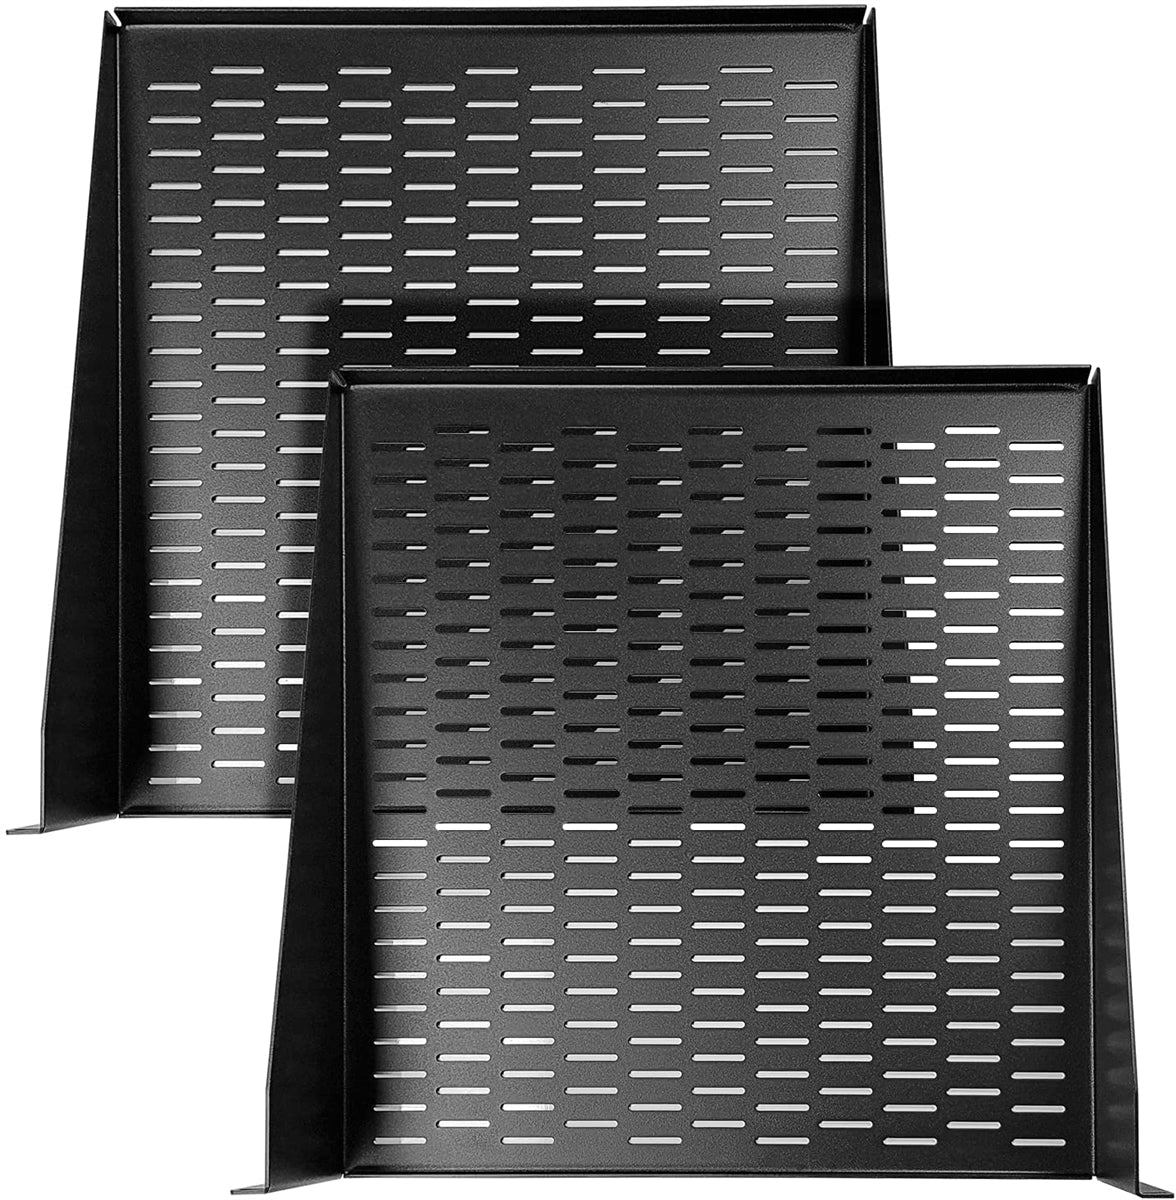 AxcessAbles 2U Vented Rack Shelf - 2 Pack | Rack Trays for 19 Inch Equipment Rack Cabinets | 18" Deep Rackmount Shelf with Lips | 50lb Capacity (2-Pack)